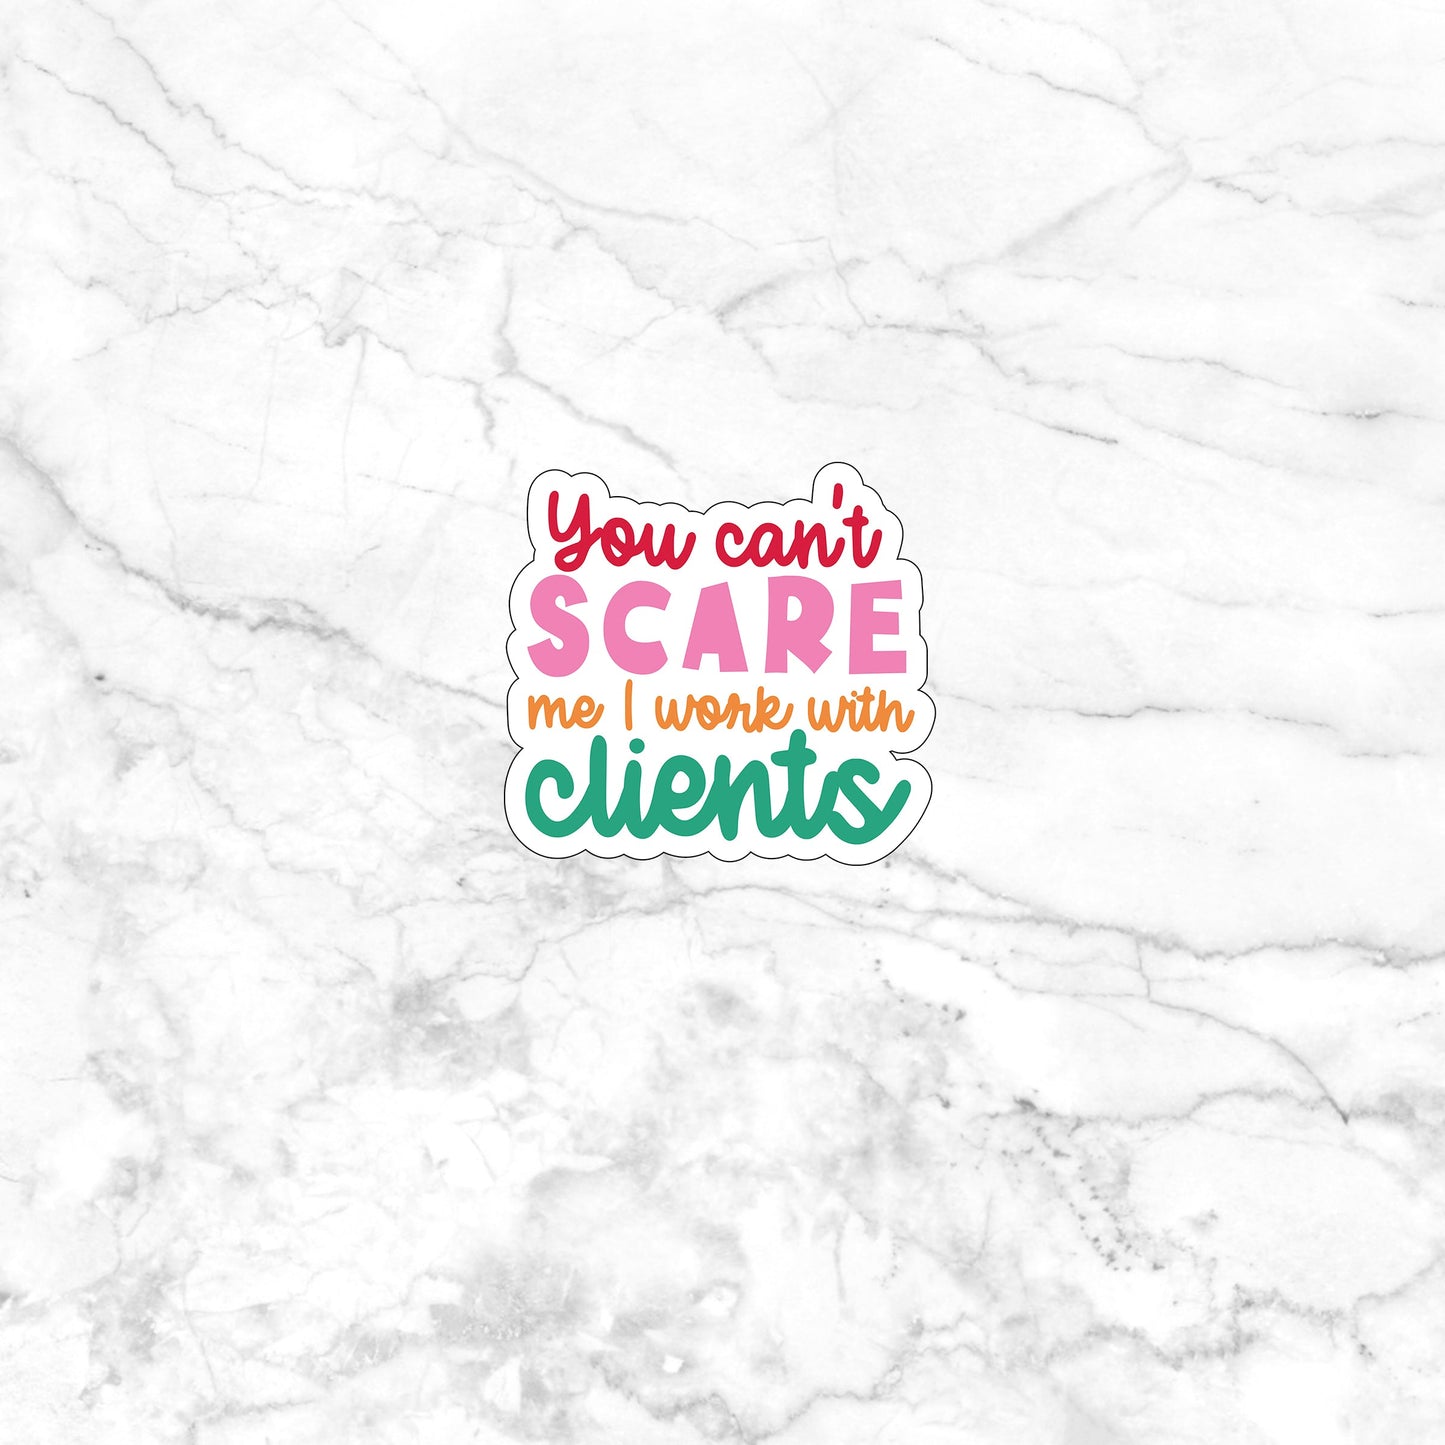 You can't scare me I work with clients  Sticker,  Vinyl sticker, laptop sticker, Tablet sticker